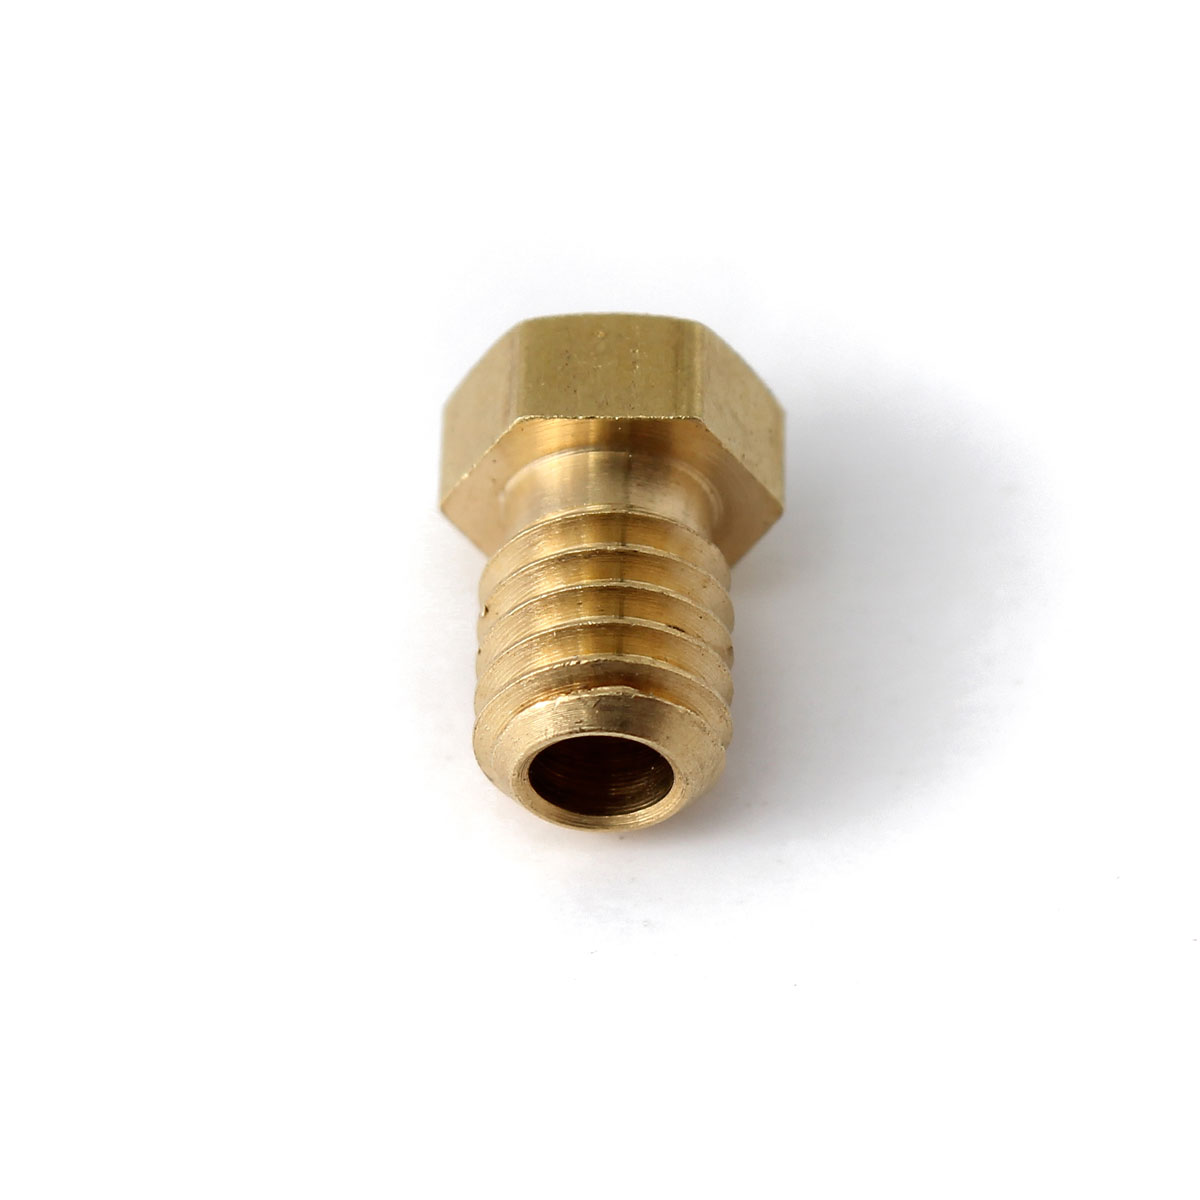 Spare-Nozzle-For-Geeetech-All-Metal-J-head-Hotend-Extruder-1146128-5